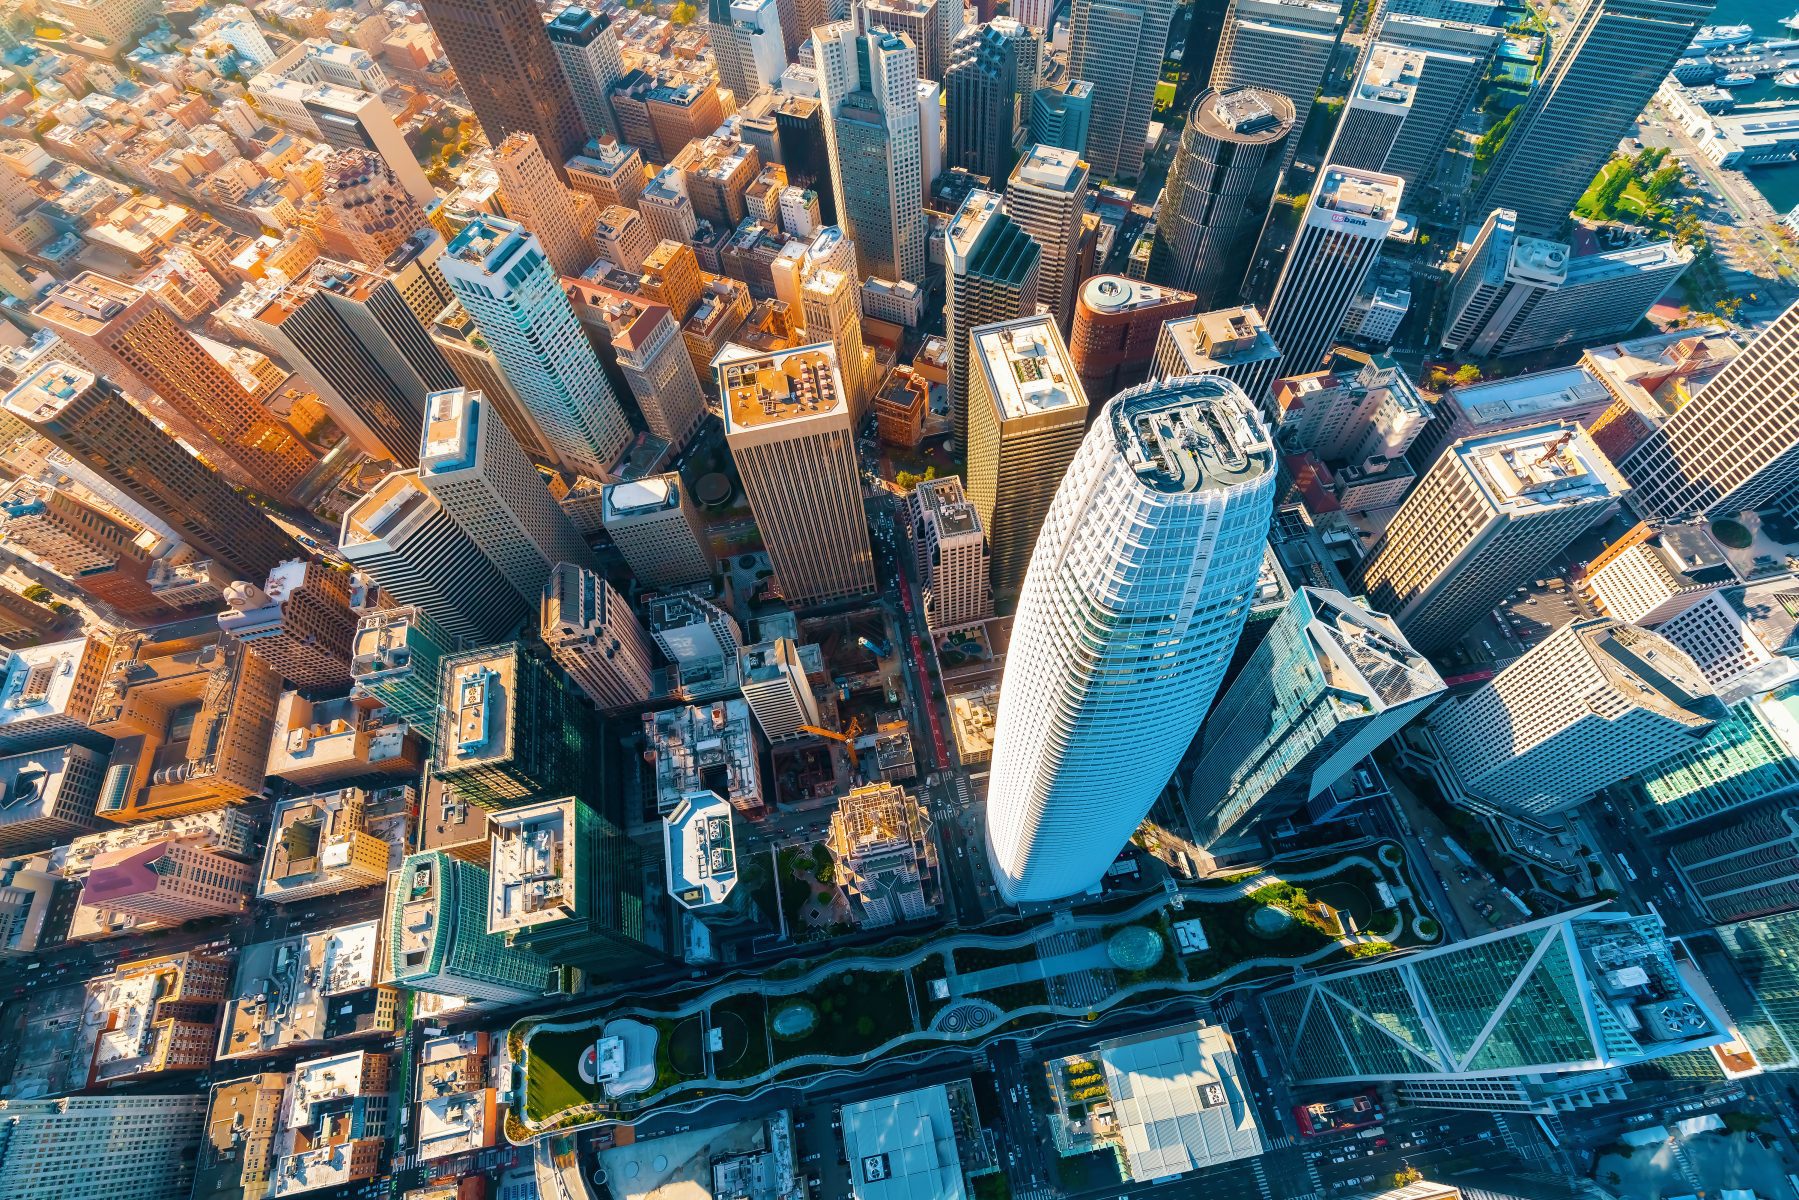 An aerial view of skyscrapers in San Francisco. If you need a Walnut Creek wrongful termination attorney, contact The Law Office of Jeannette Vaccaro.